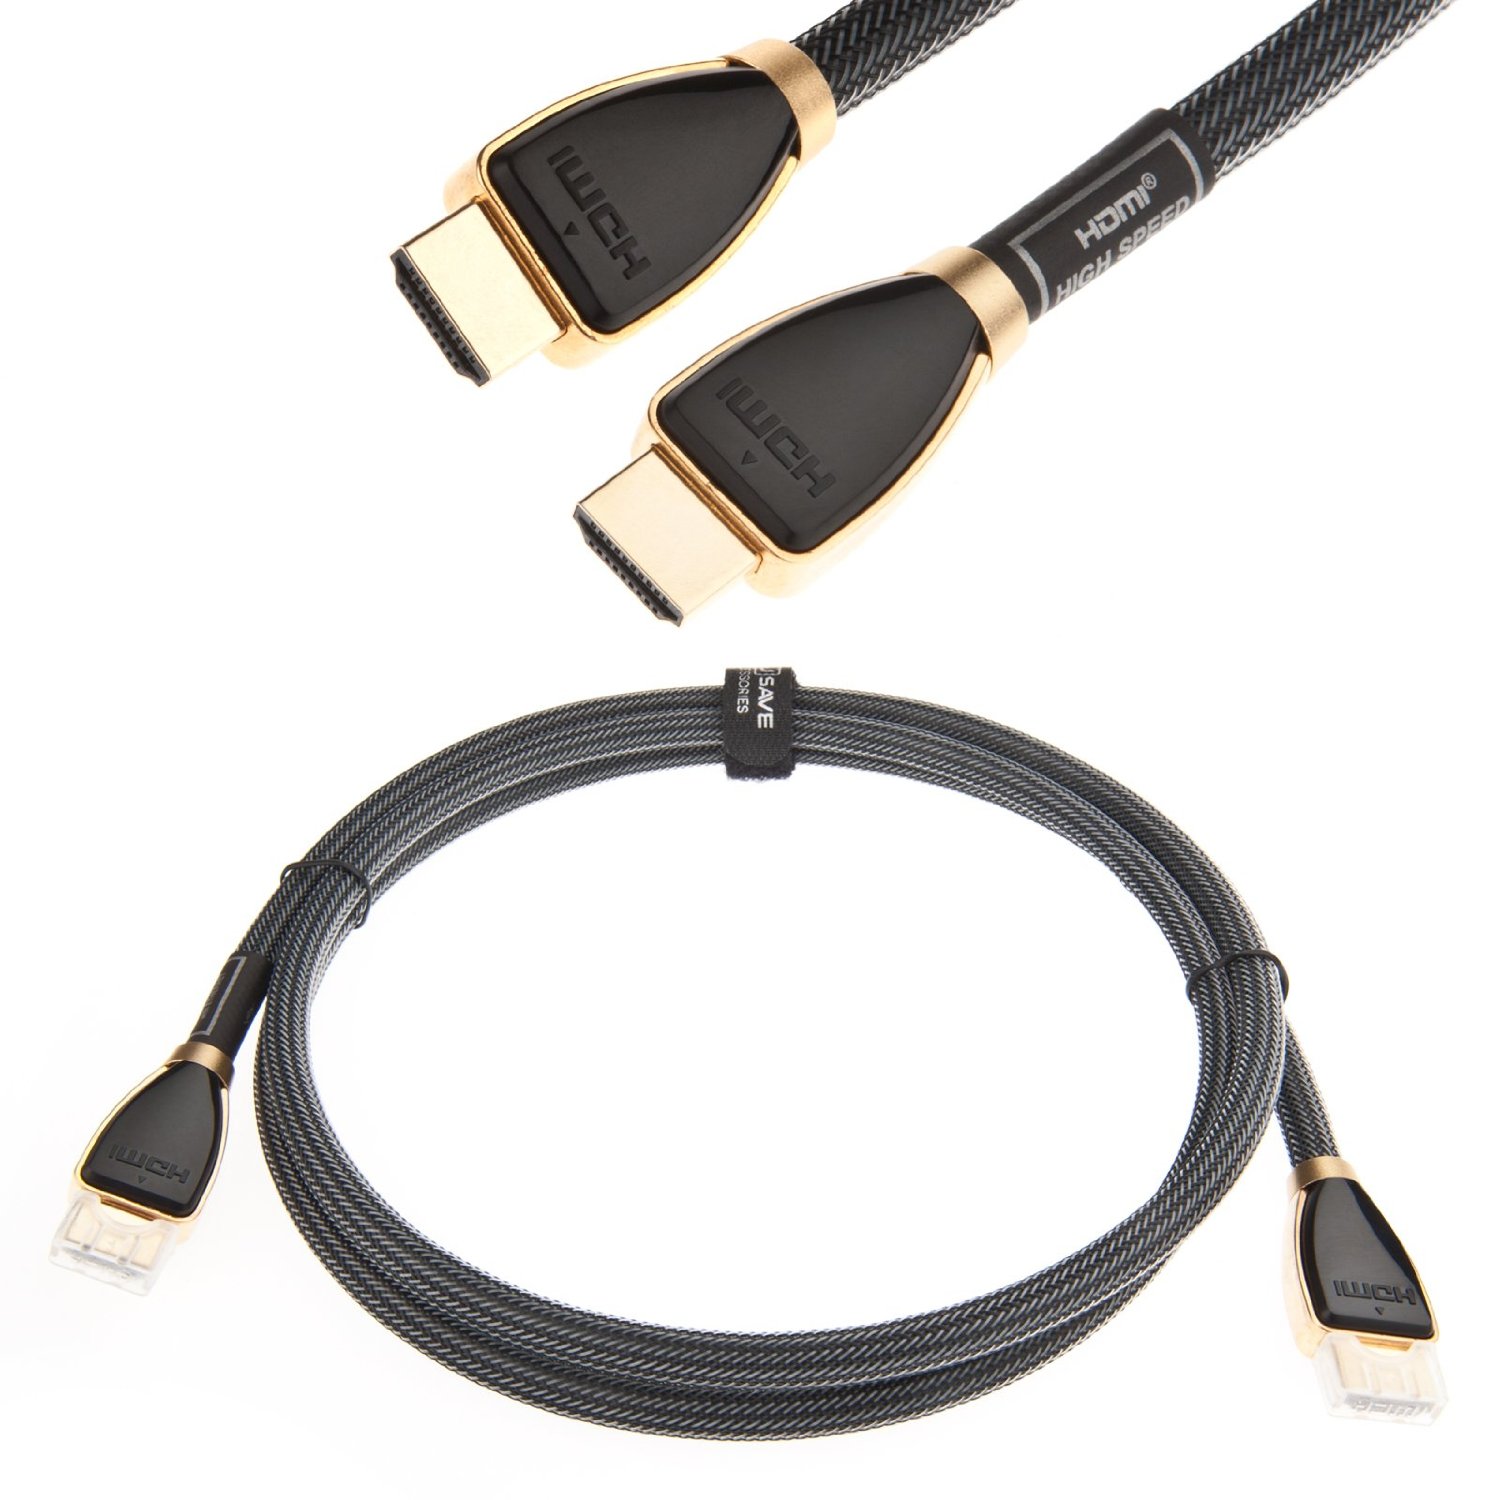 YouSave Accessories Accessories HDMI Cable 3m Gold Connectors